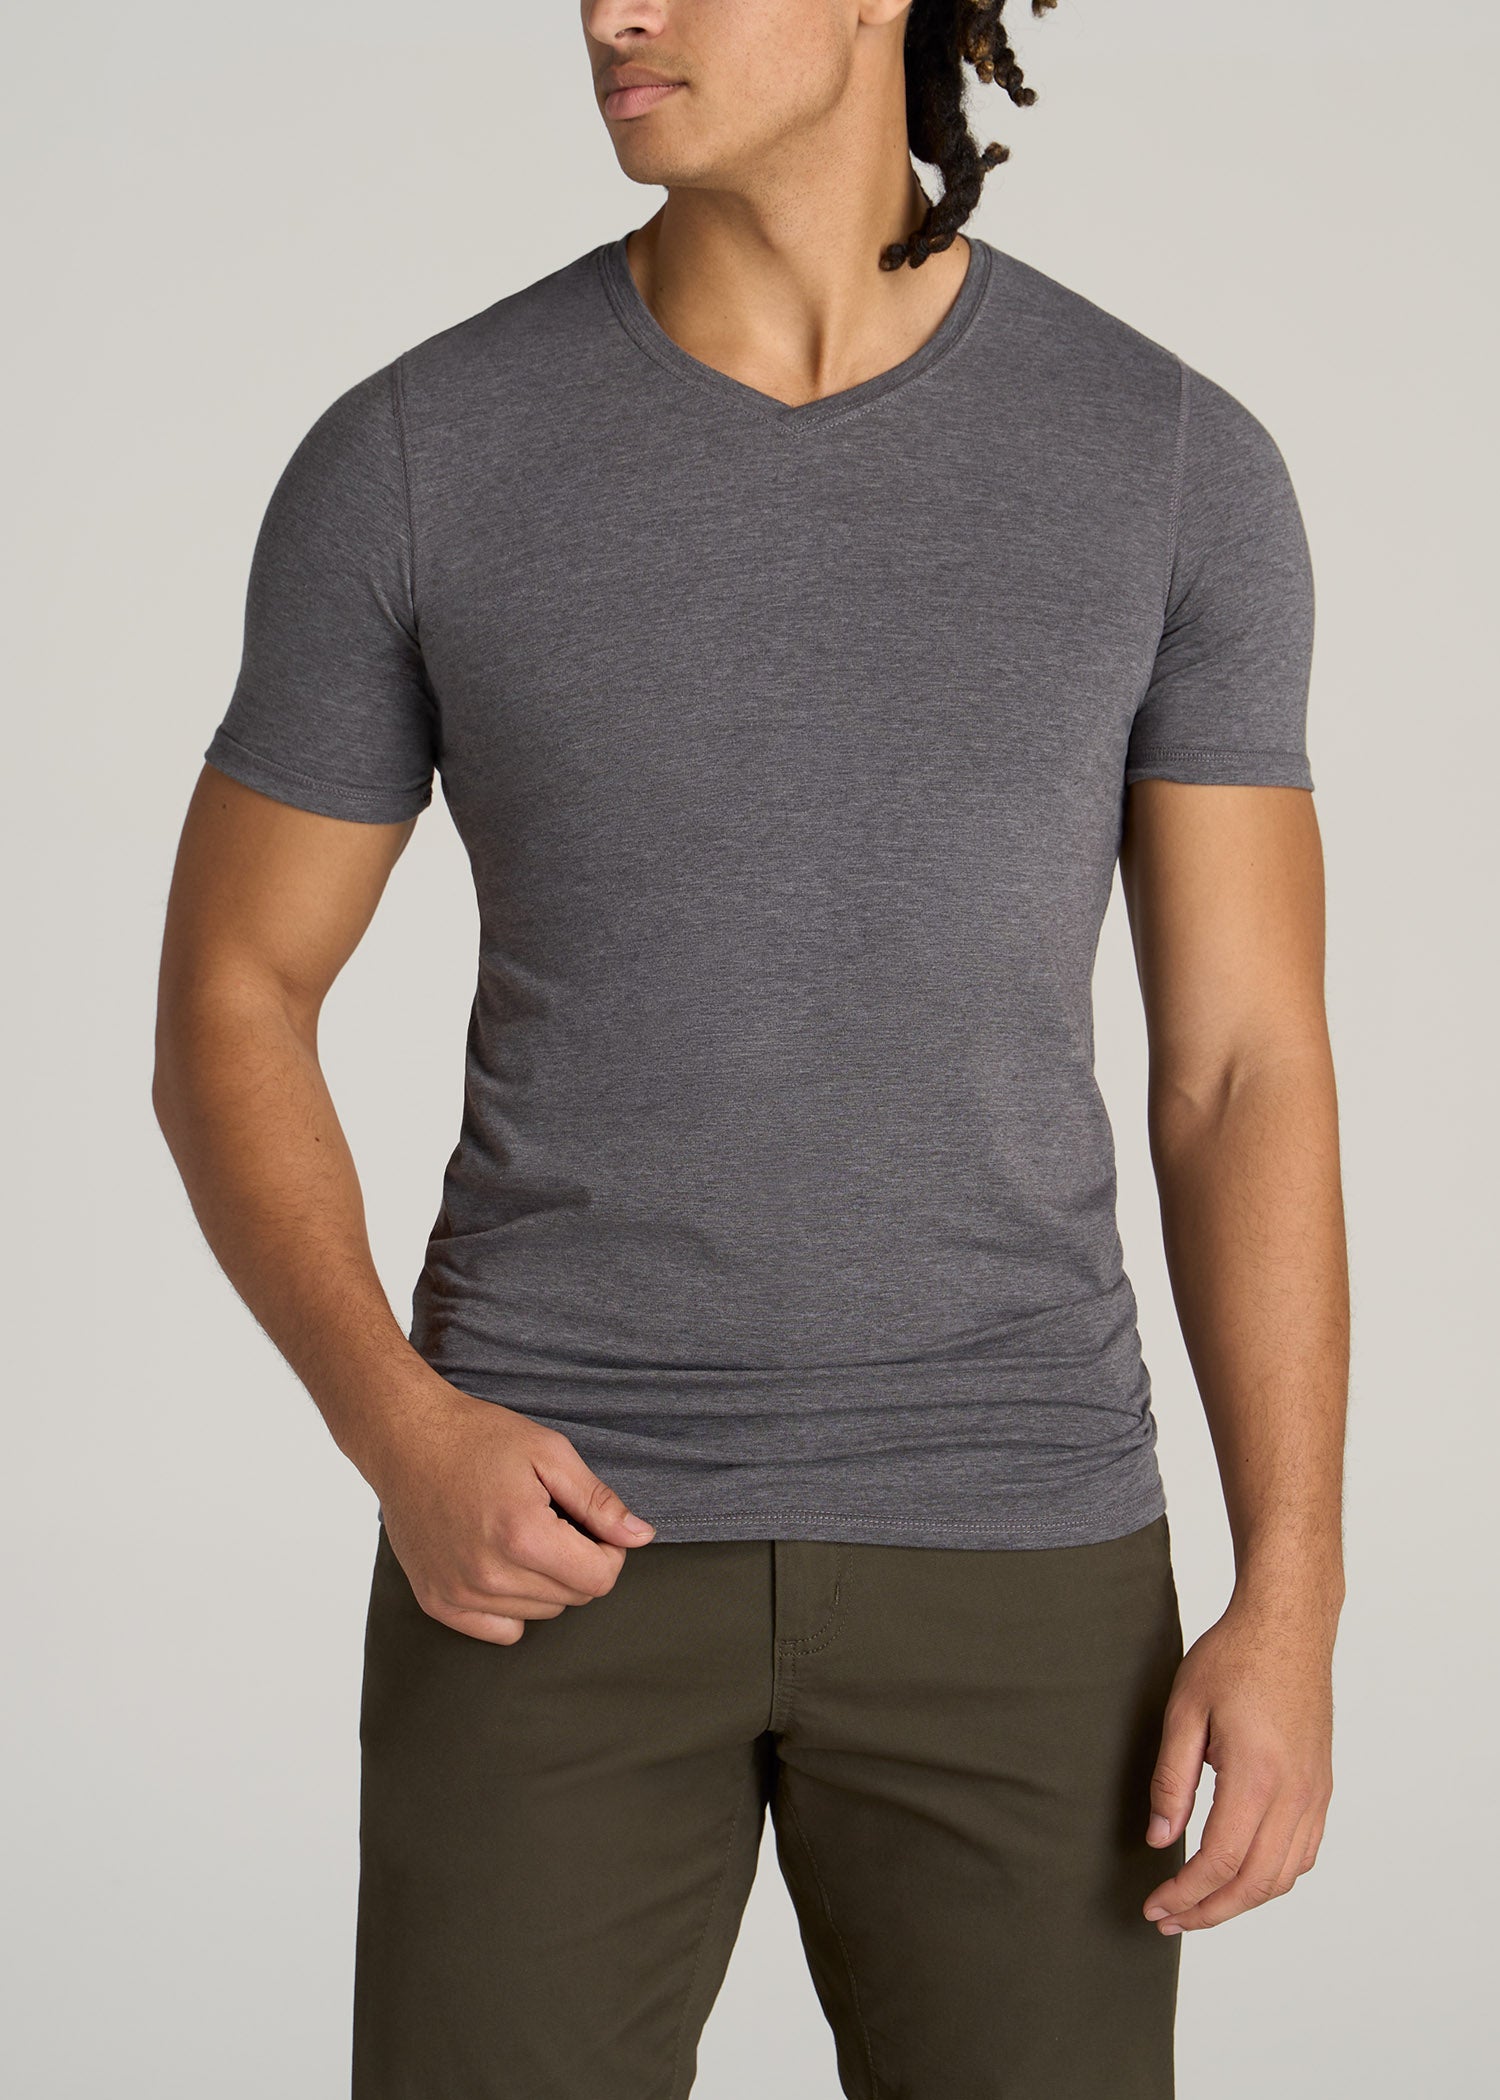 Charcoal Mix Slim Fit V-Neck Men's Tee | American Tall